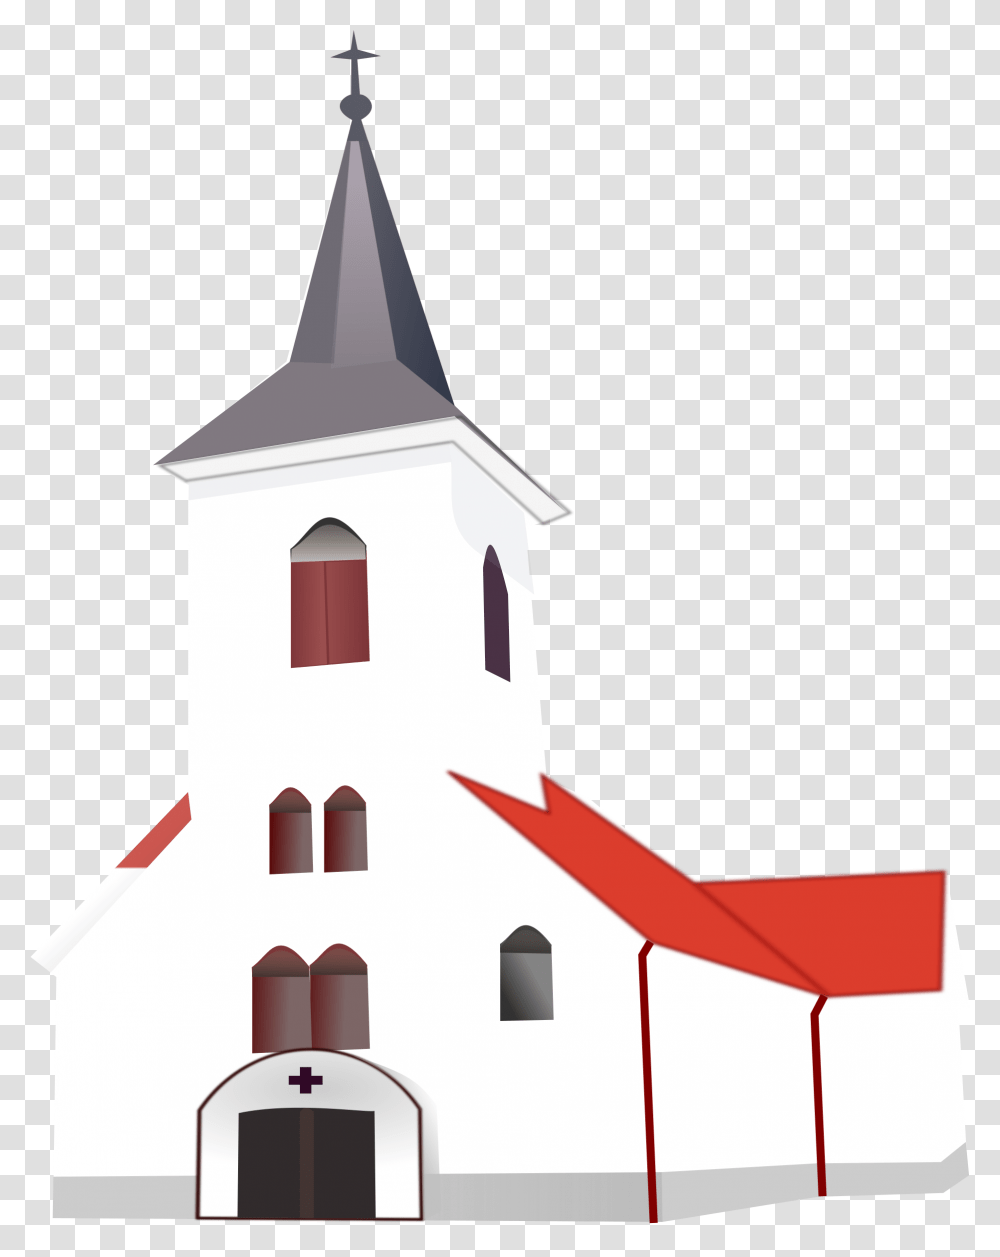 Church Architecture Christian Church Clip Art, Building, Tower, Spire, Steeple Transparent Png